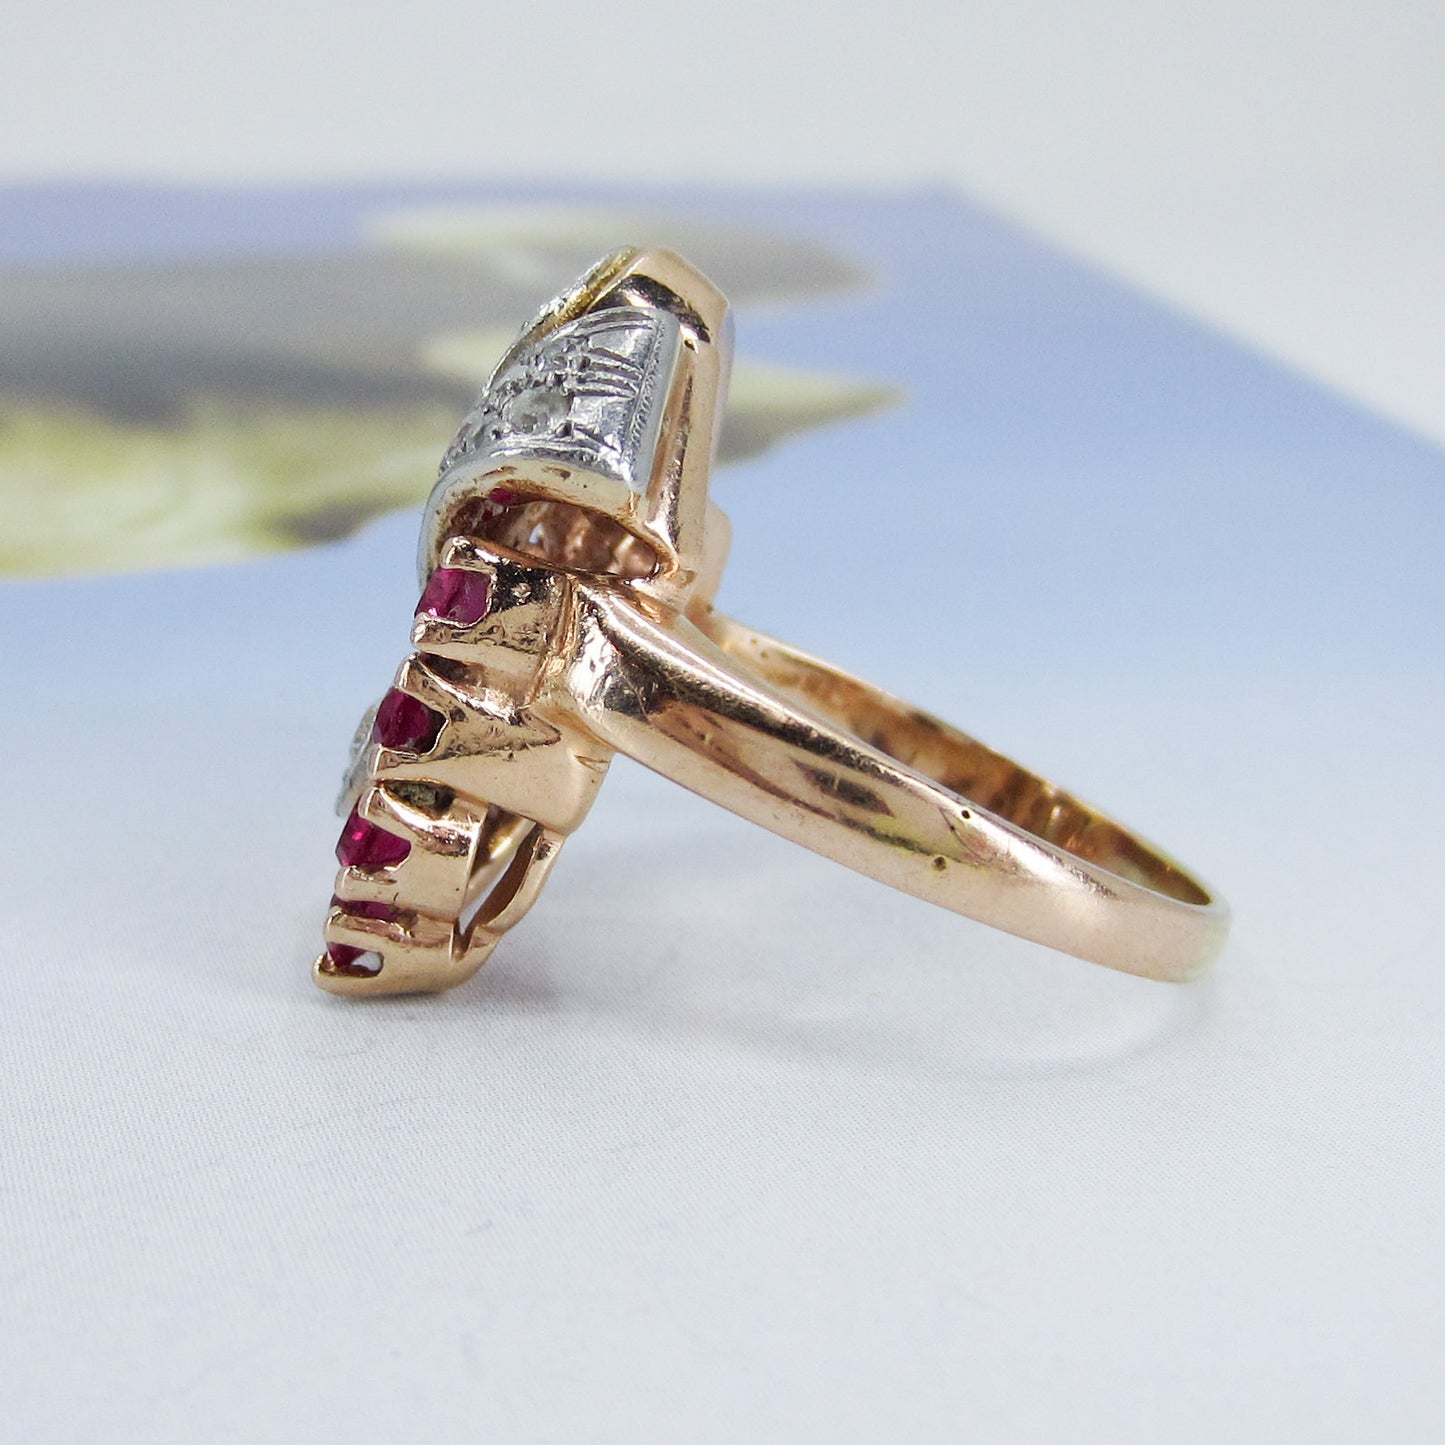 SOLD—Vintage Retro Old Hollywood Diamond and Ruby Ring 14k c. 1940